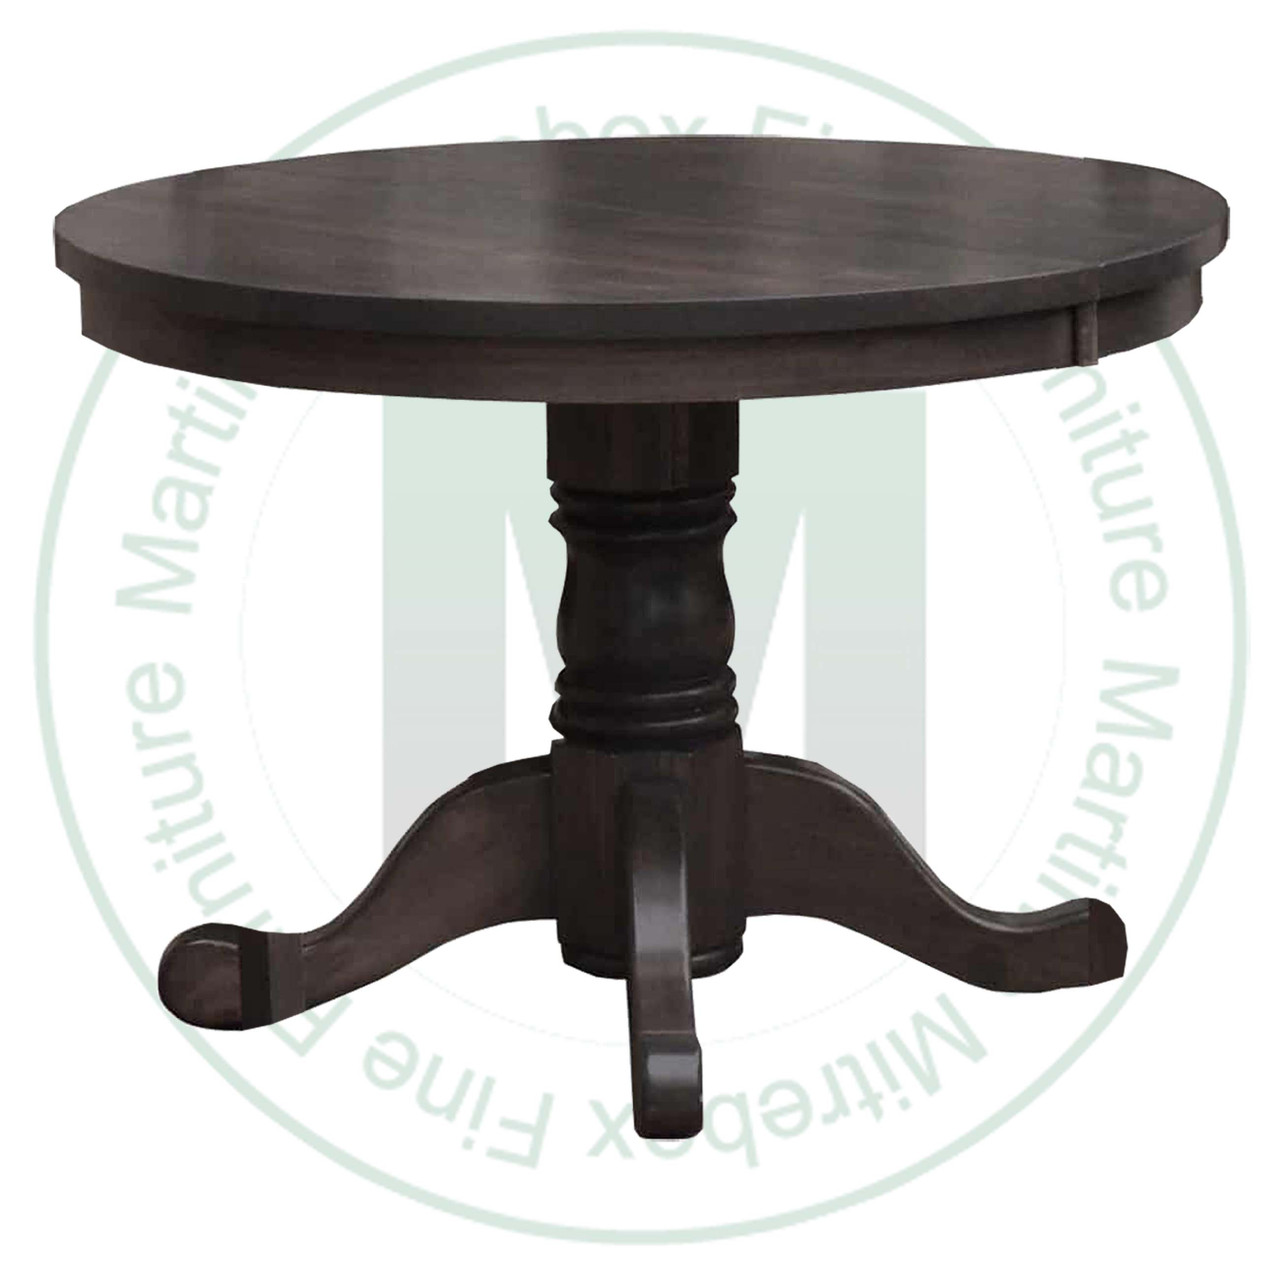 Maple Nith River Single Pedestal Round Solid Top Table 36''D x 36''W x 30''H With 7'' Pedestal